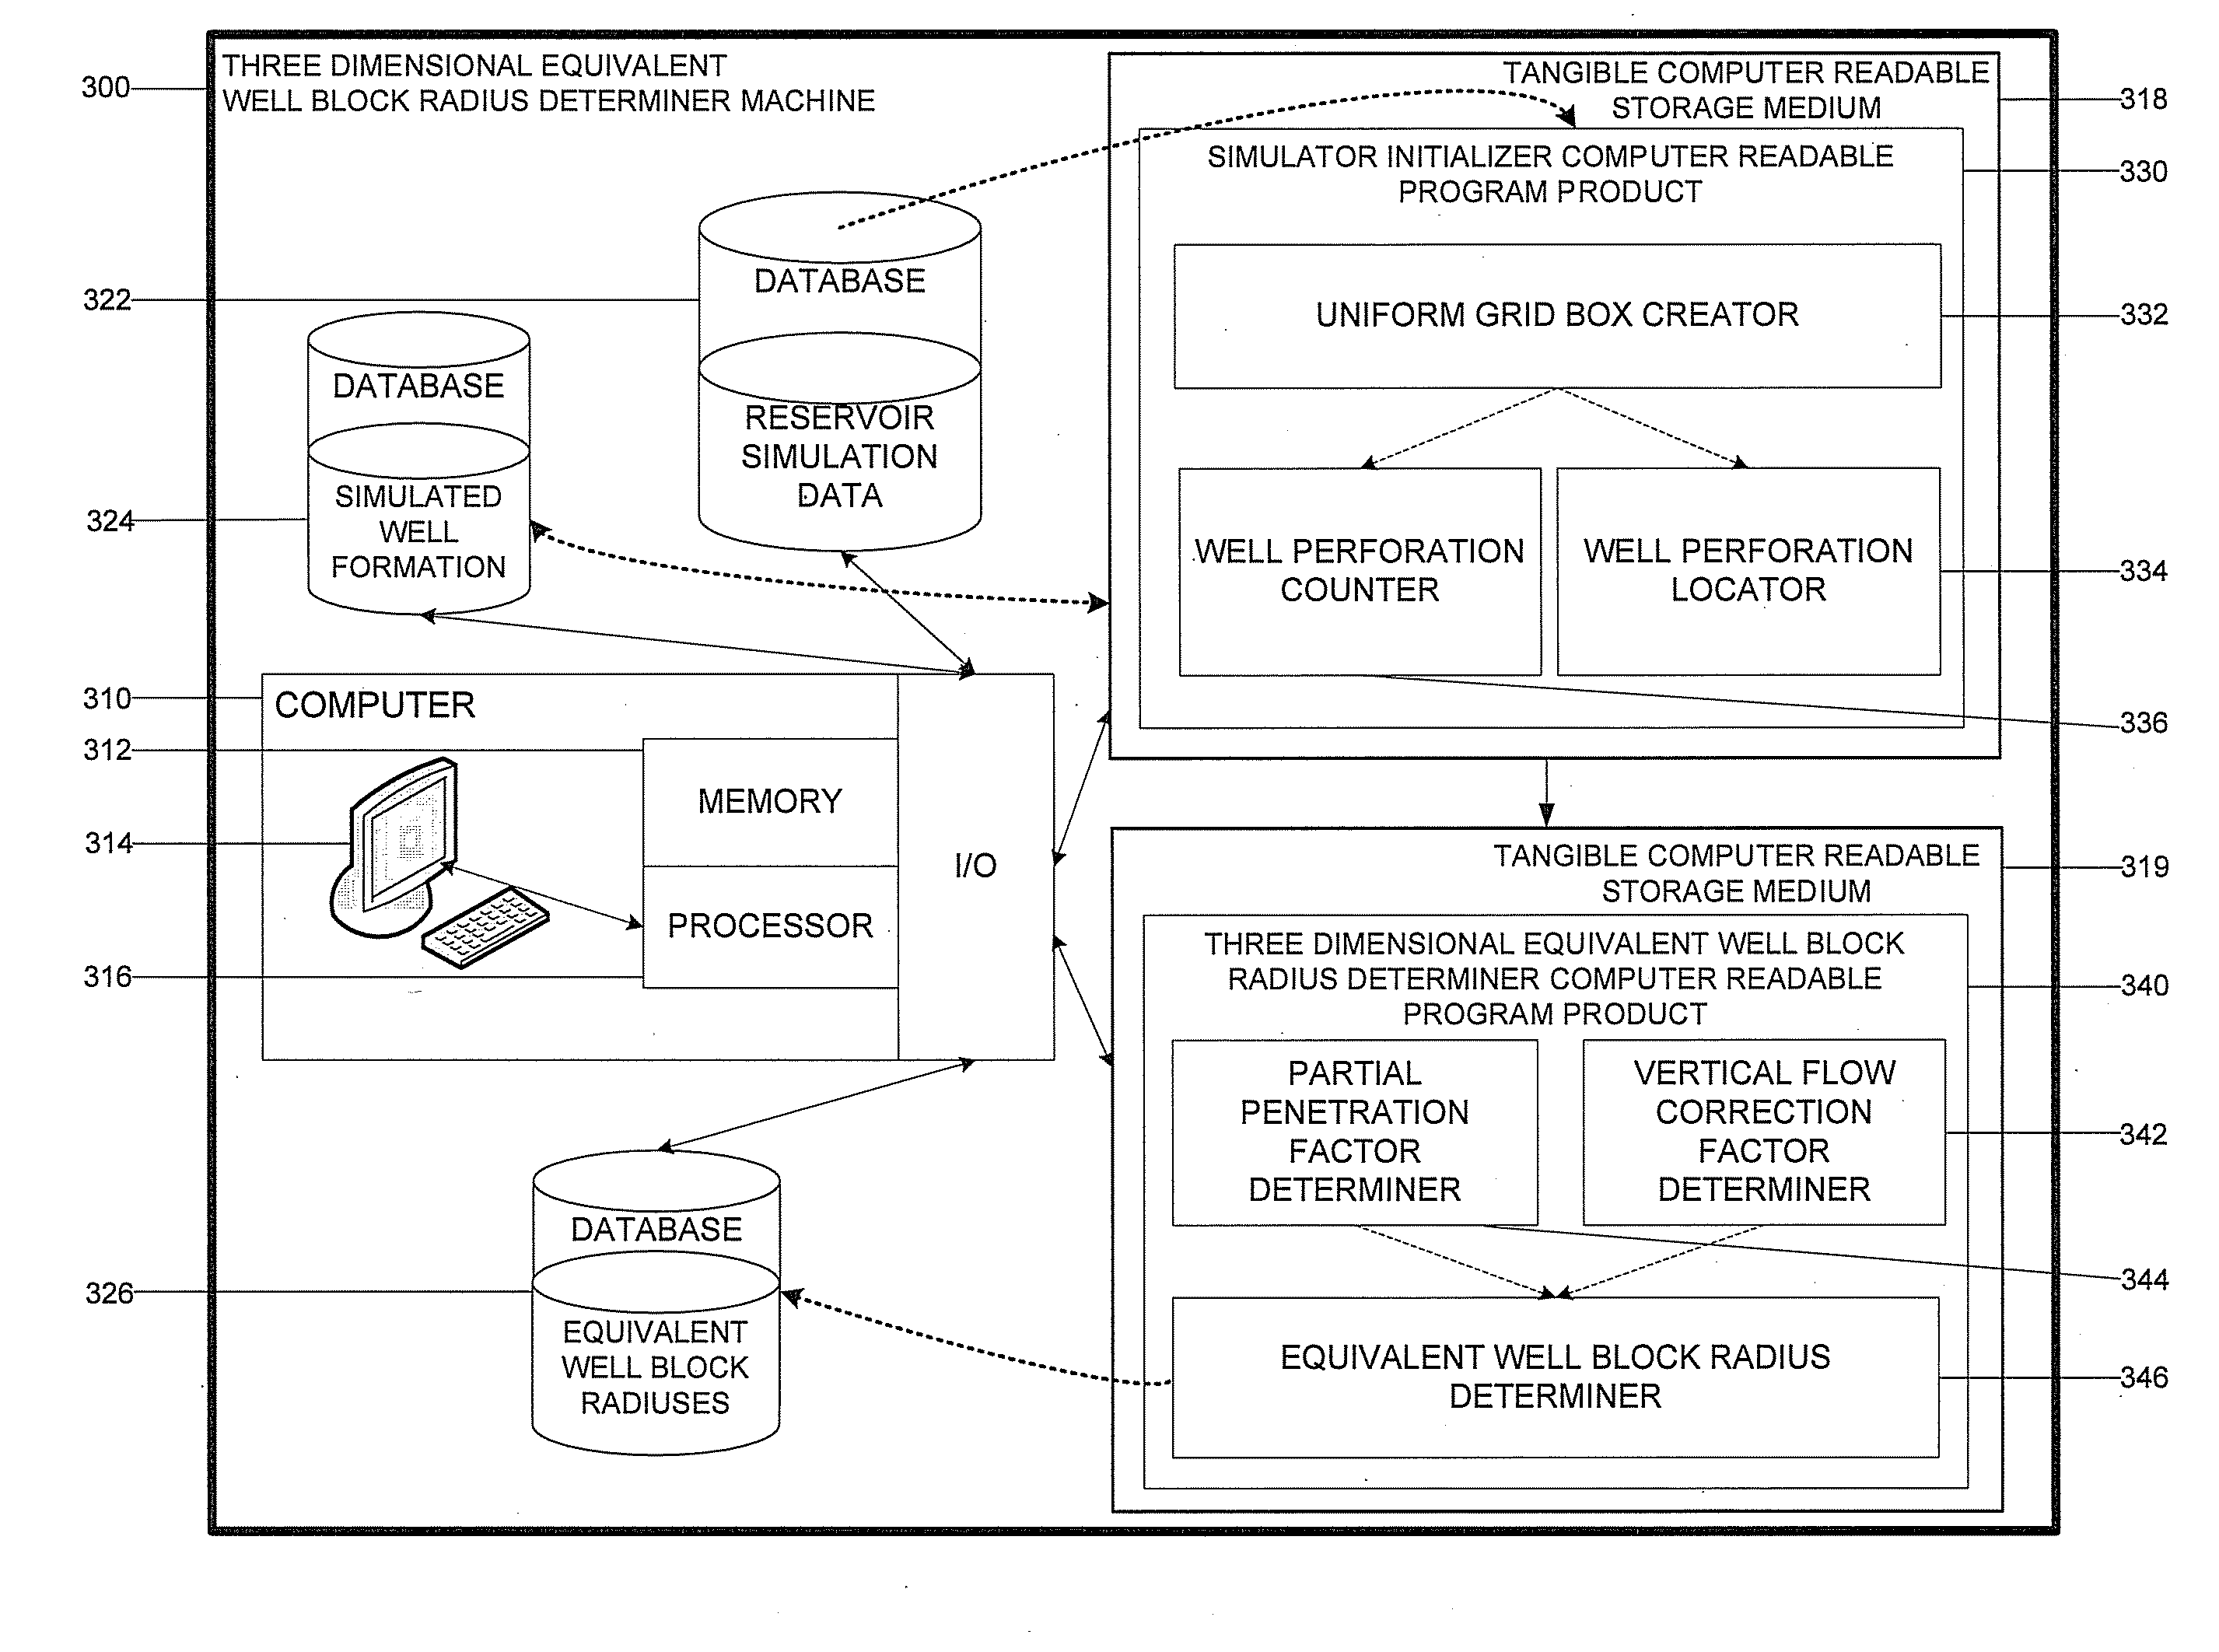 Three Dimensional Well Block Radius Determiner Machine And Related Computer Implemented Methods And Program Products